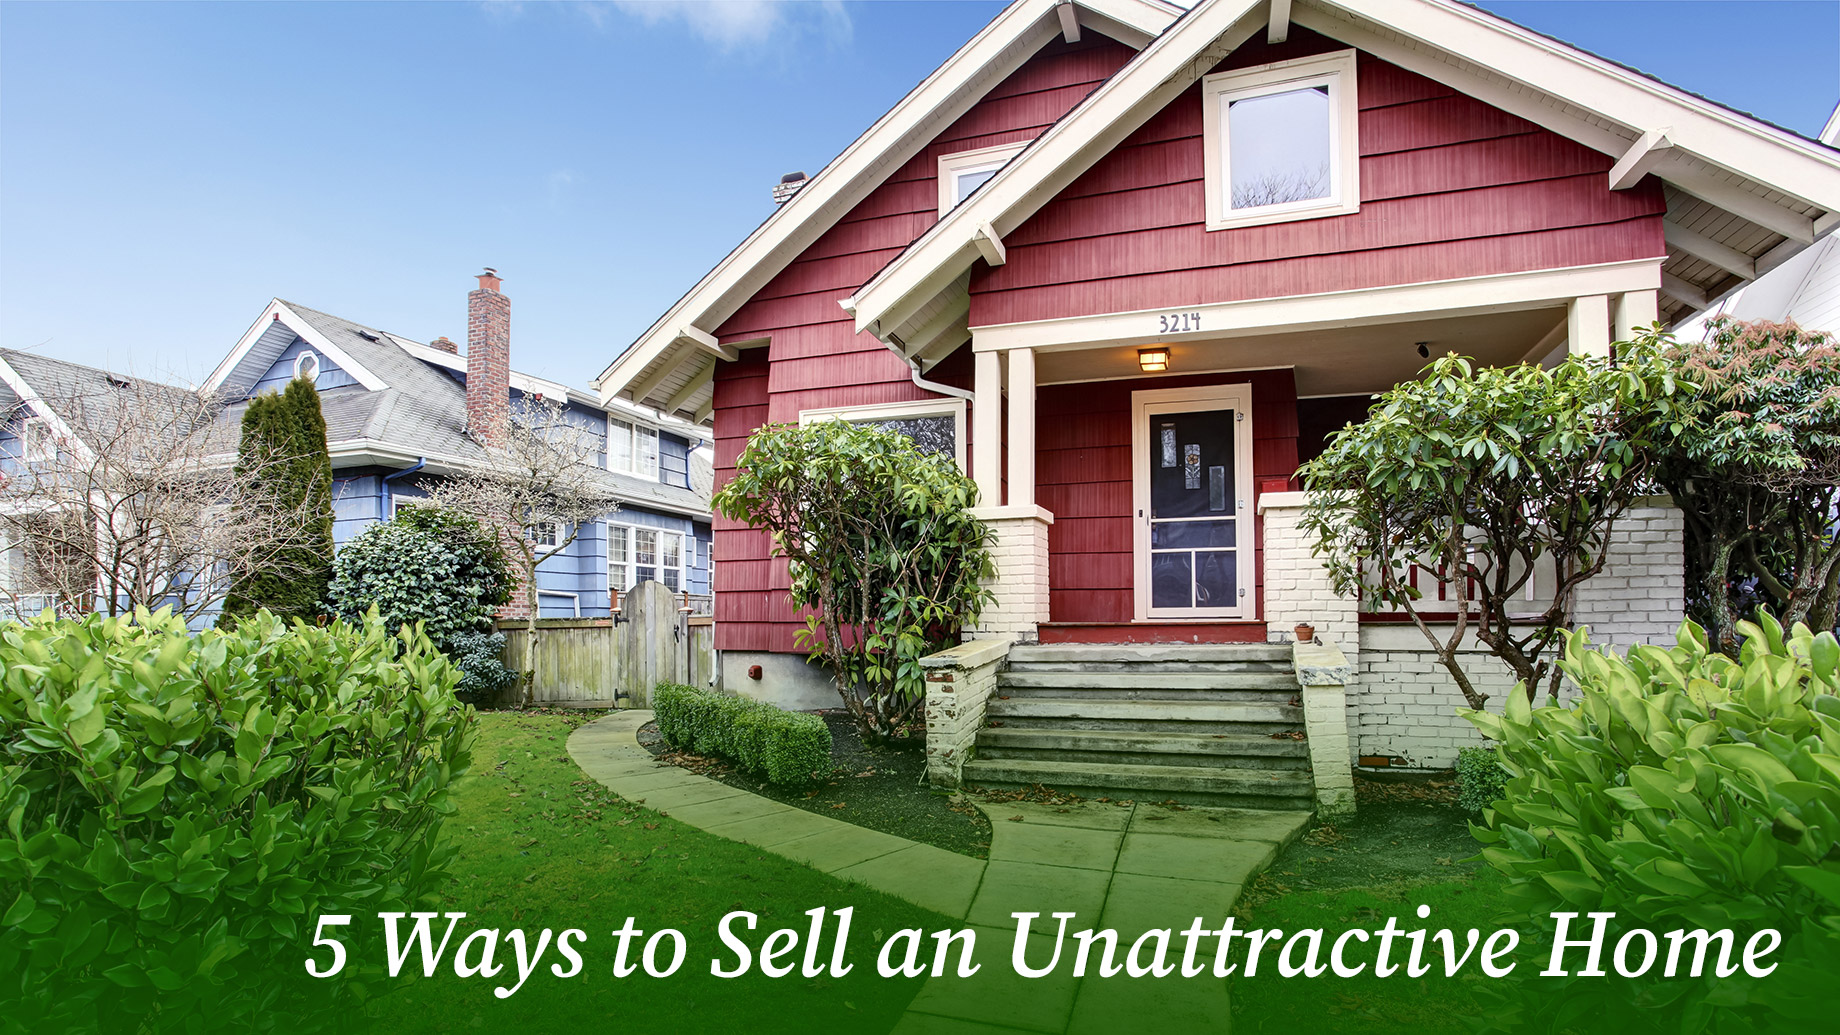 5 Ways to Sell an Unattractive Home